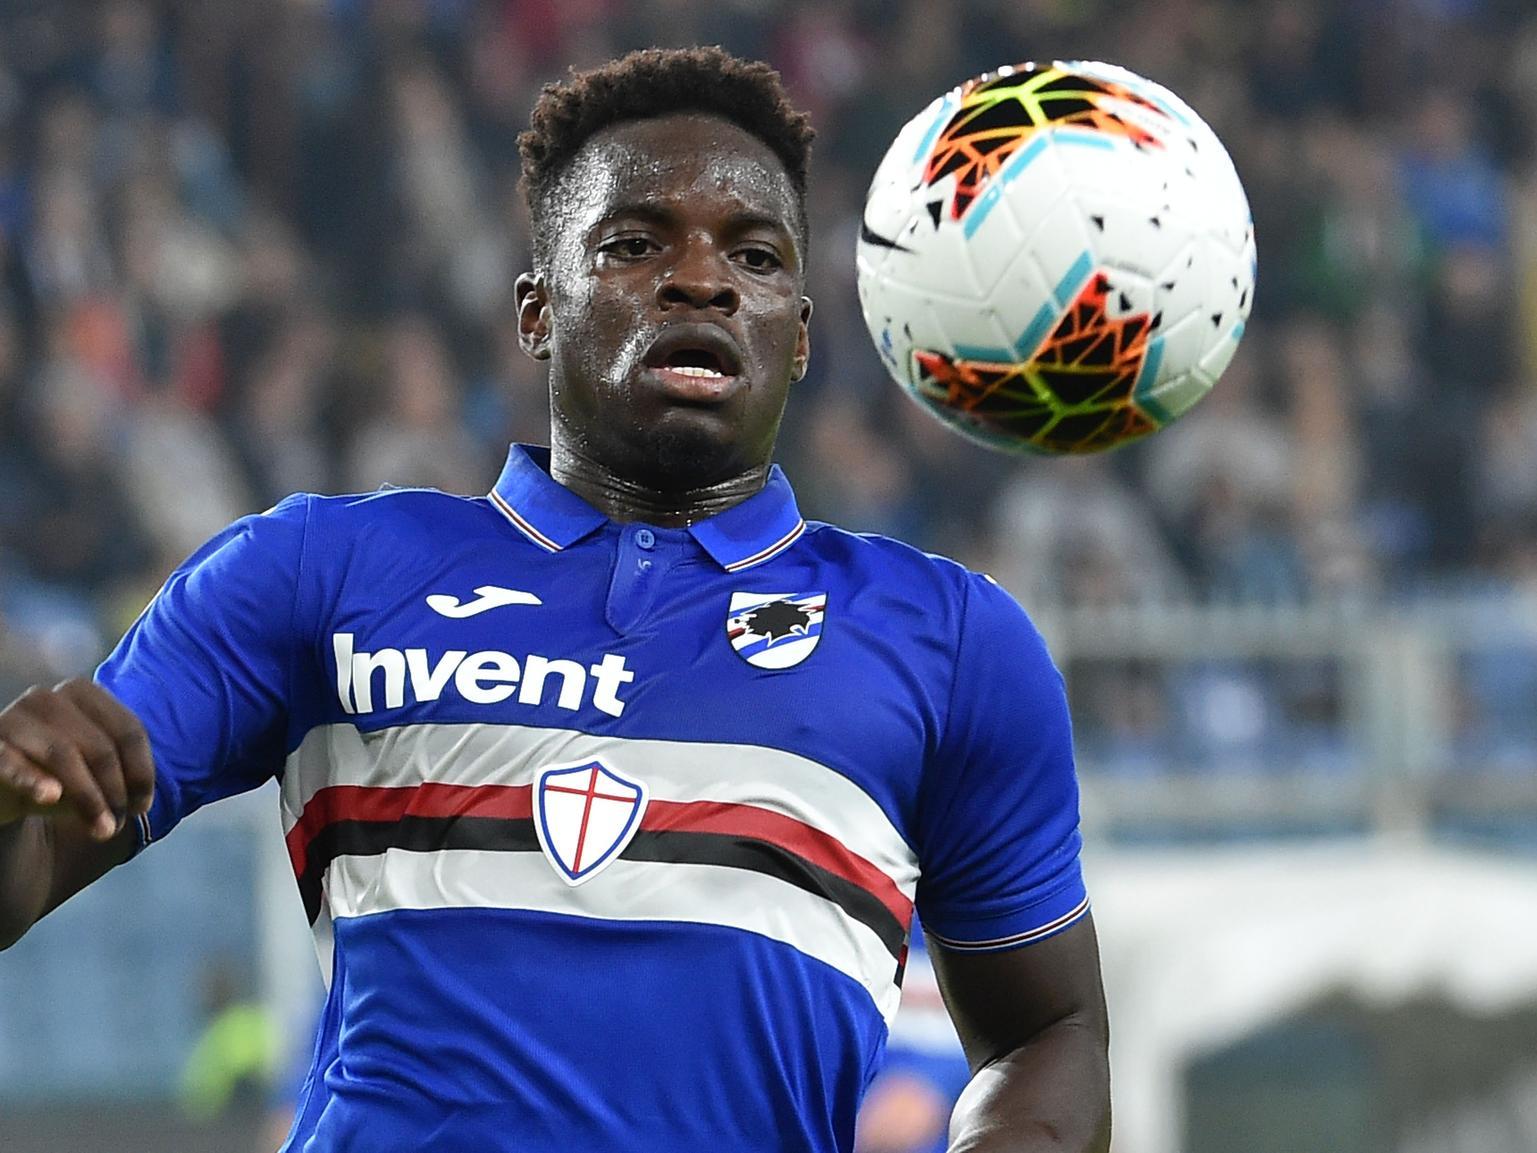 Leeds United could be set for a cash windfall should West Ham signRonaldo Vieira from Sampdoria, with the Whites said to have ensured a sell-on fee percentage before selling him in 2018. (The Athletic)